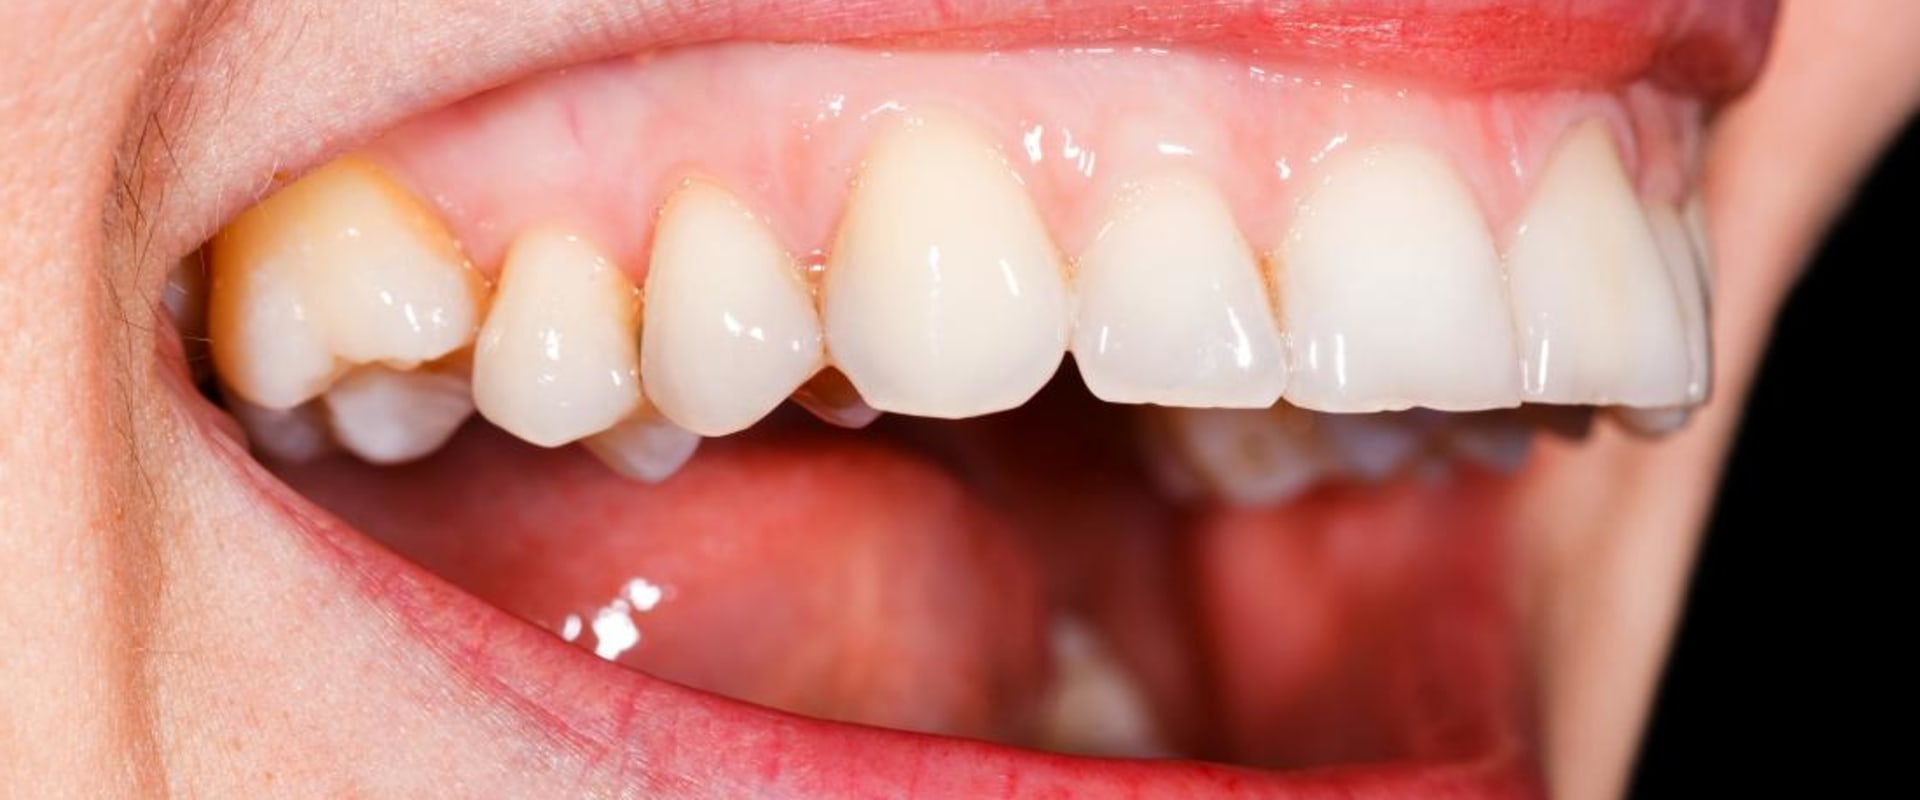 How do you check if your gums are healthy?